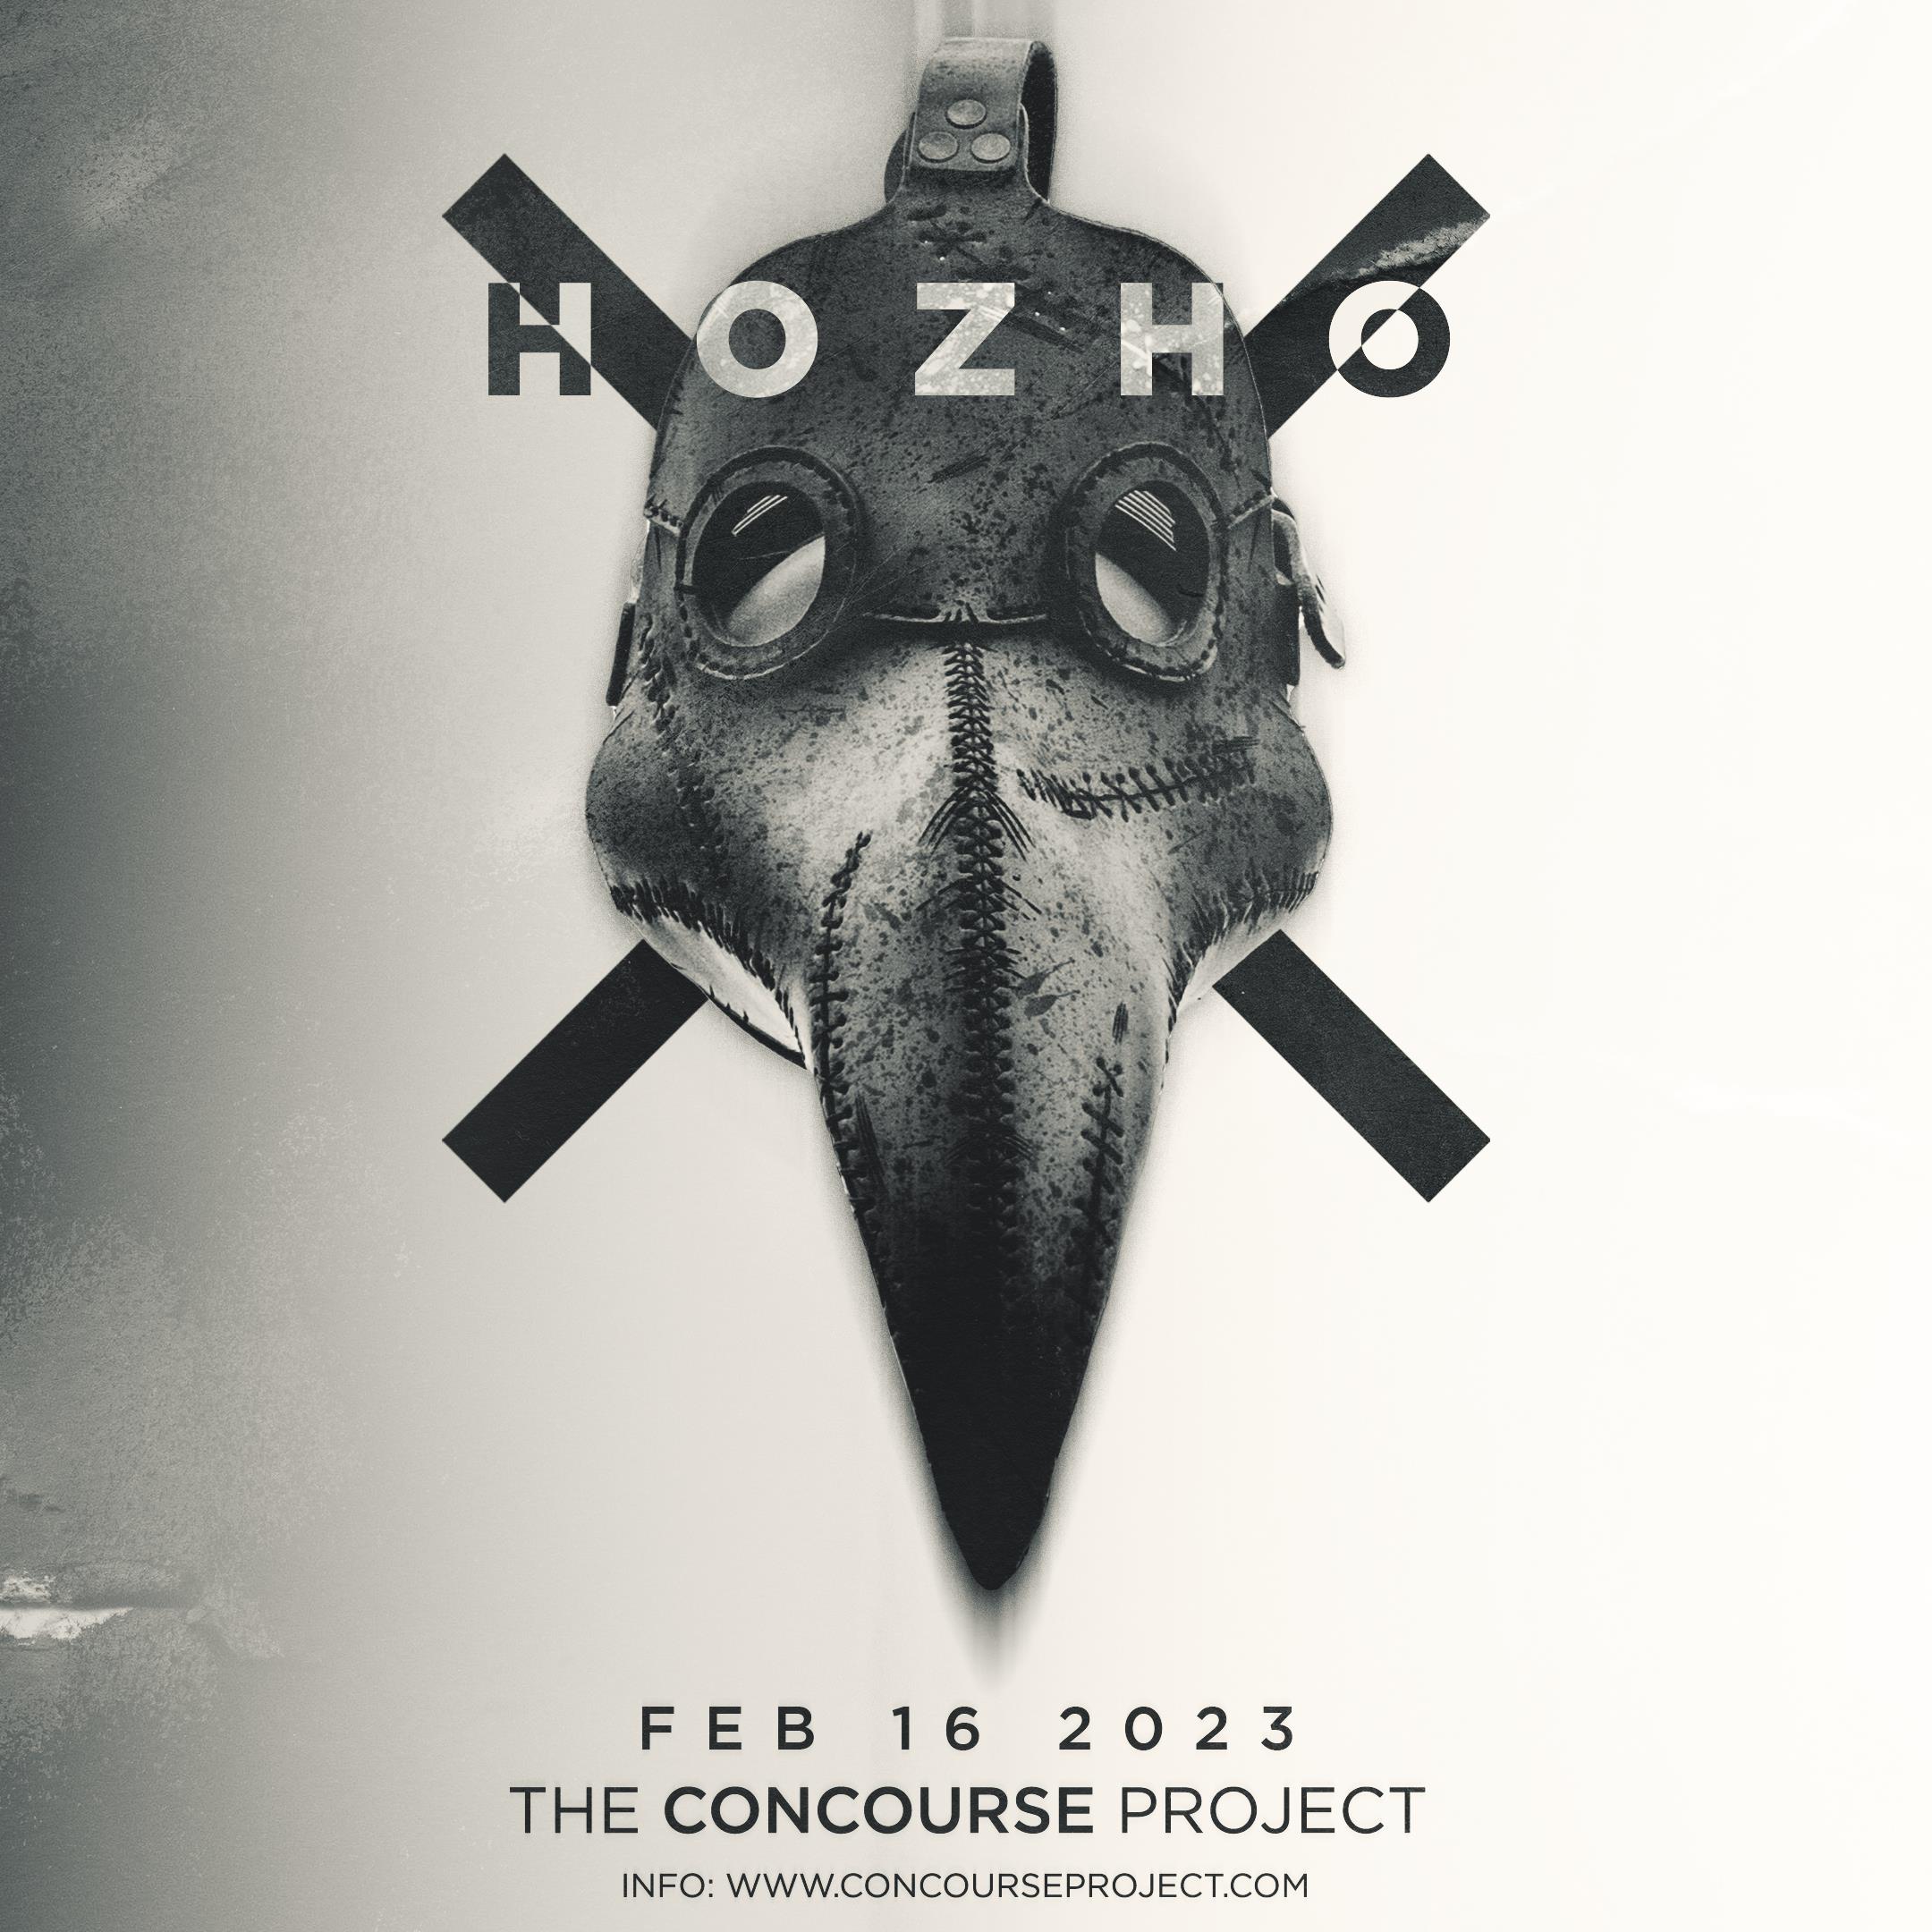 FREE WITH RSVP: Hozho at The Concourse Project